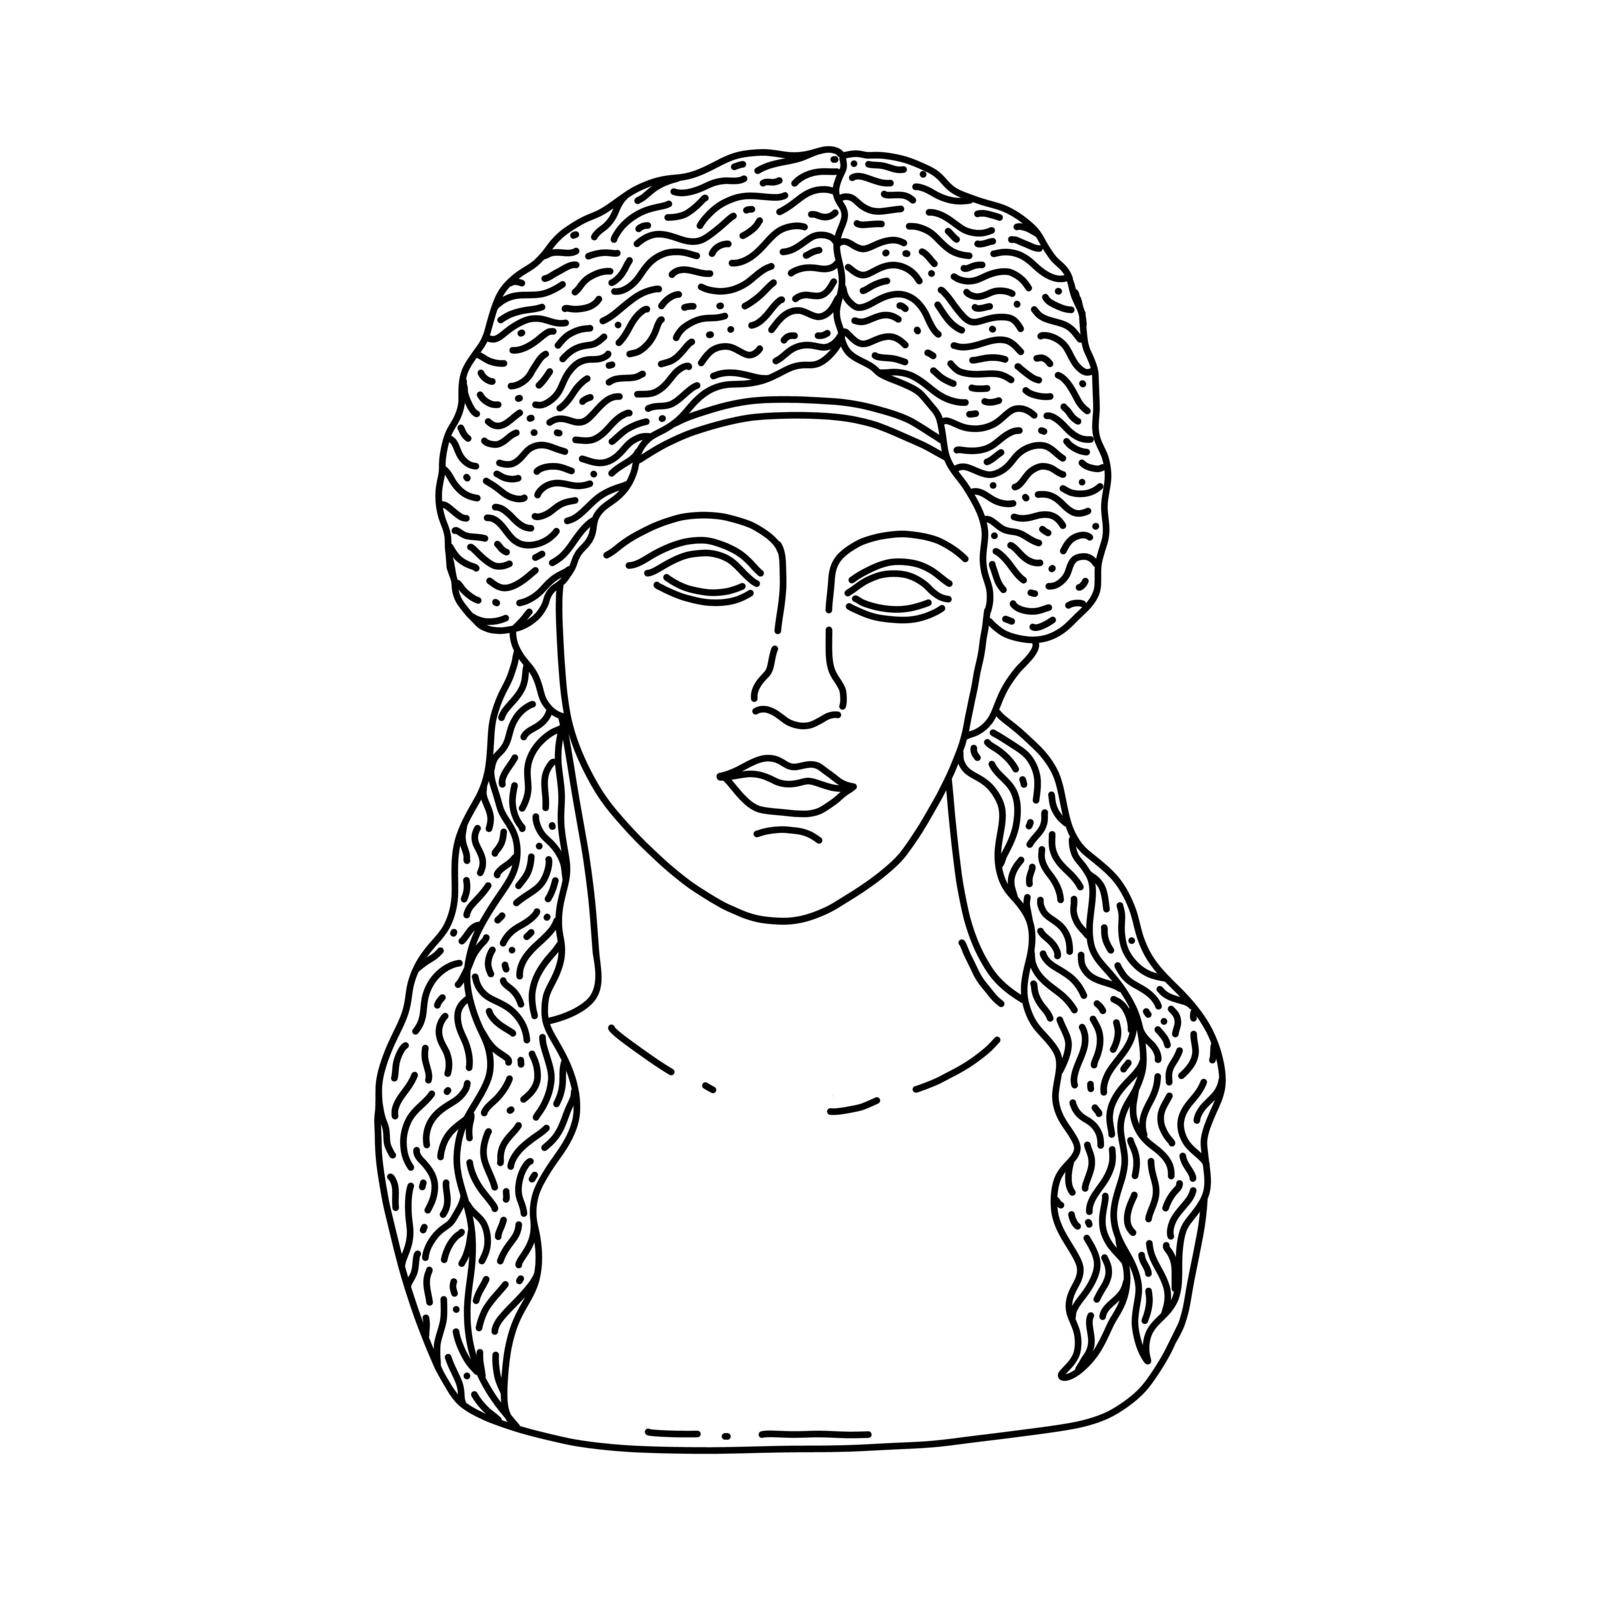 Greek god Dionis in doodle style on white background.